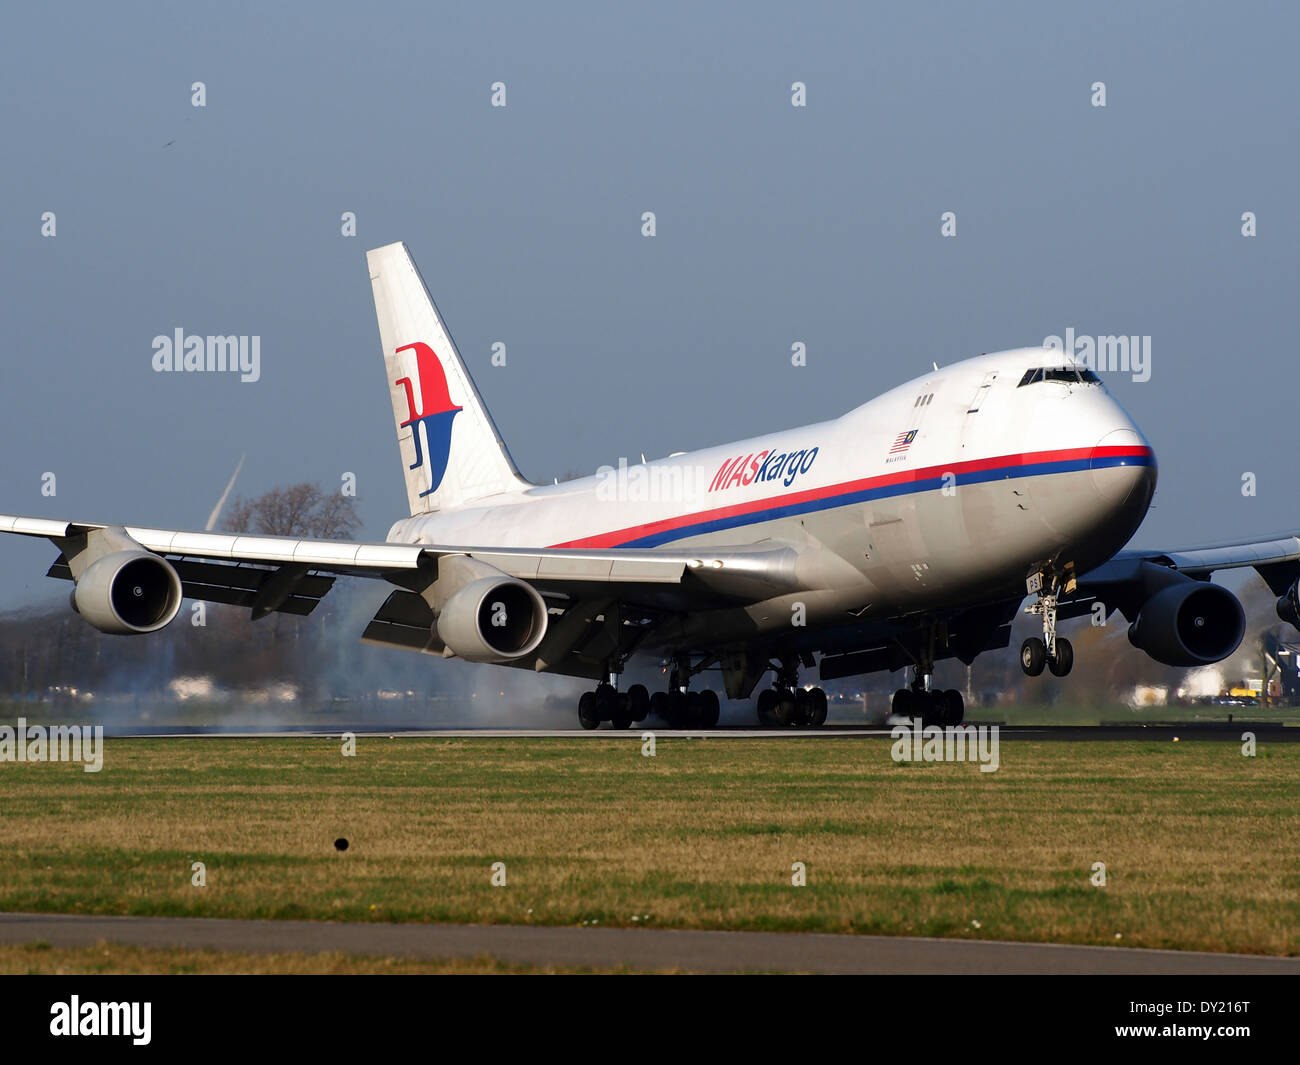 9M-MPS Malaysia Airlines Boeing 747-4H6F, landing at Schiphol (AMS - EHAM), Netherlands, pic2 Stock Photo